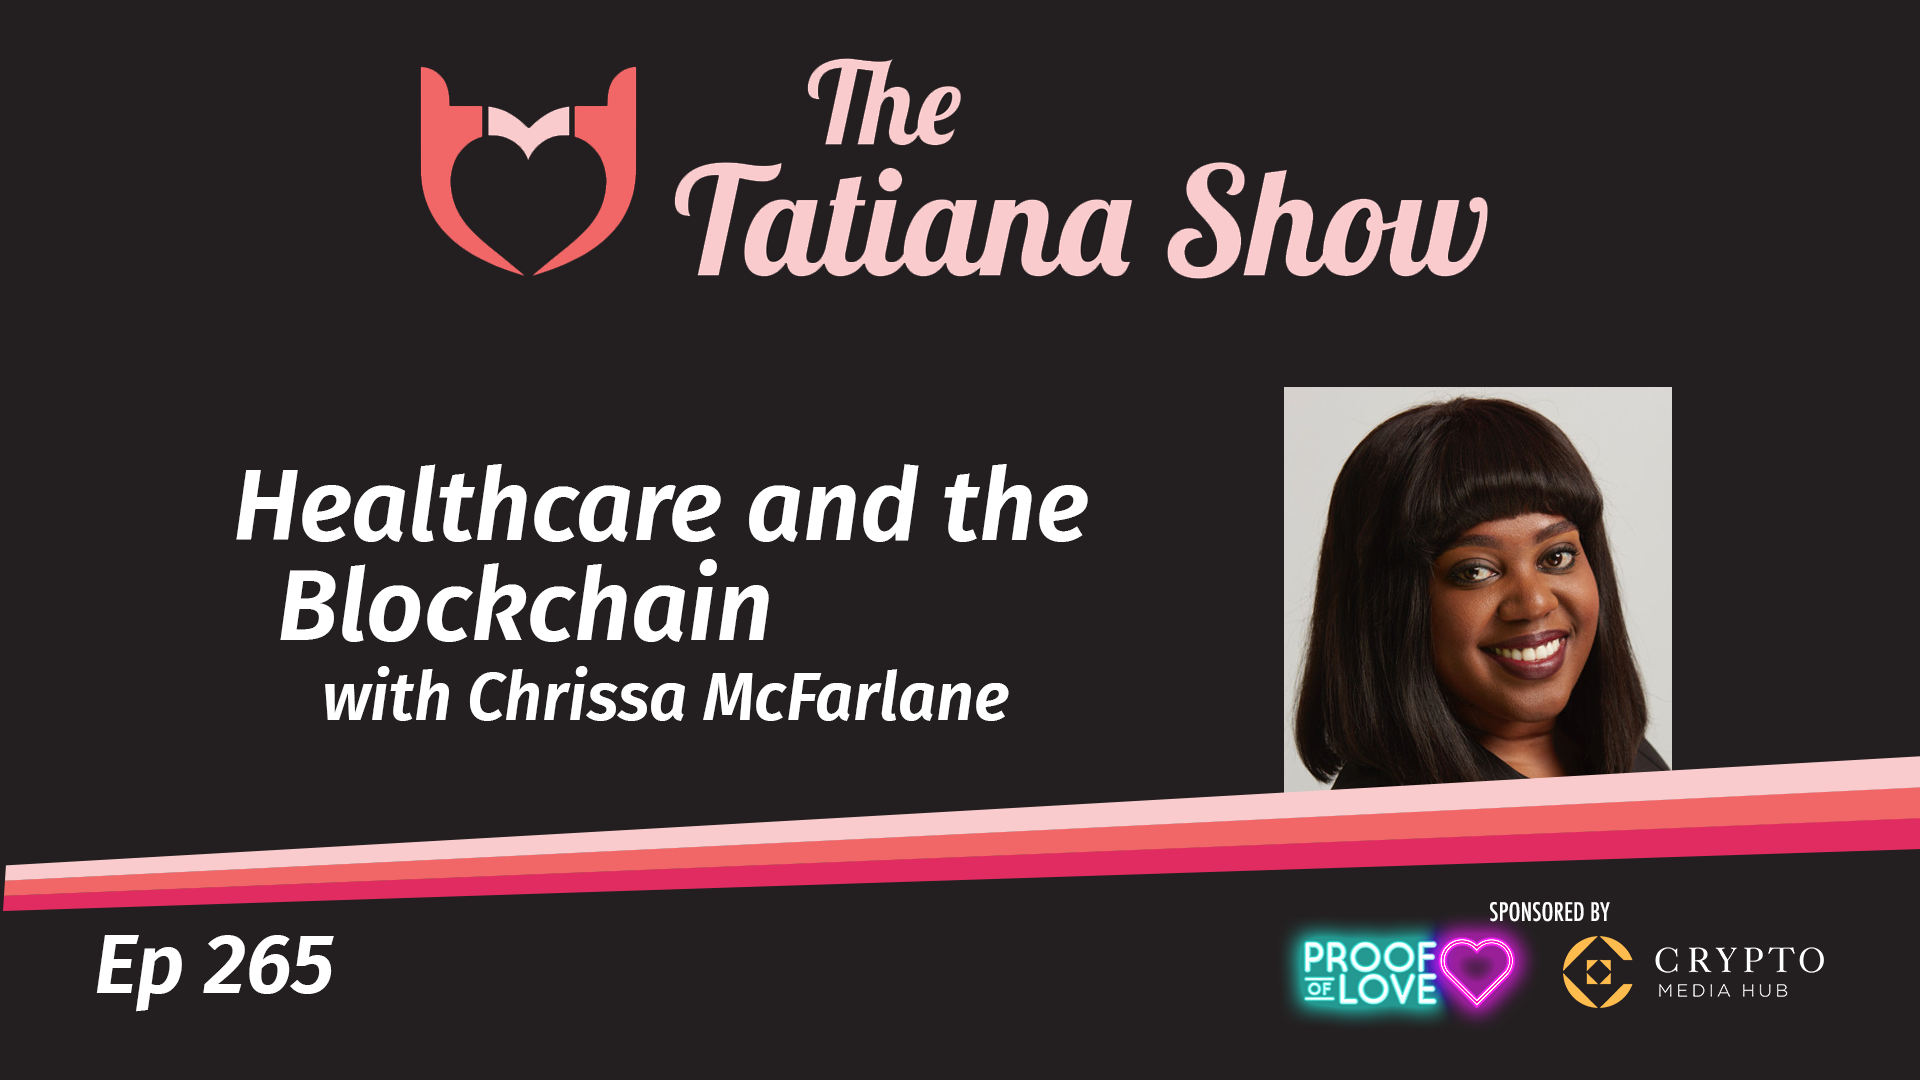 Healthcare and the Blockchain with Chrissa McFarlane